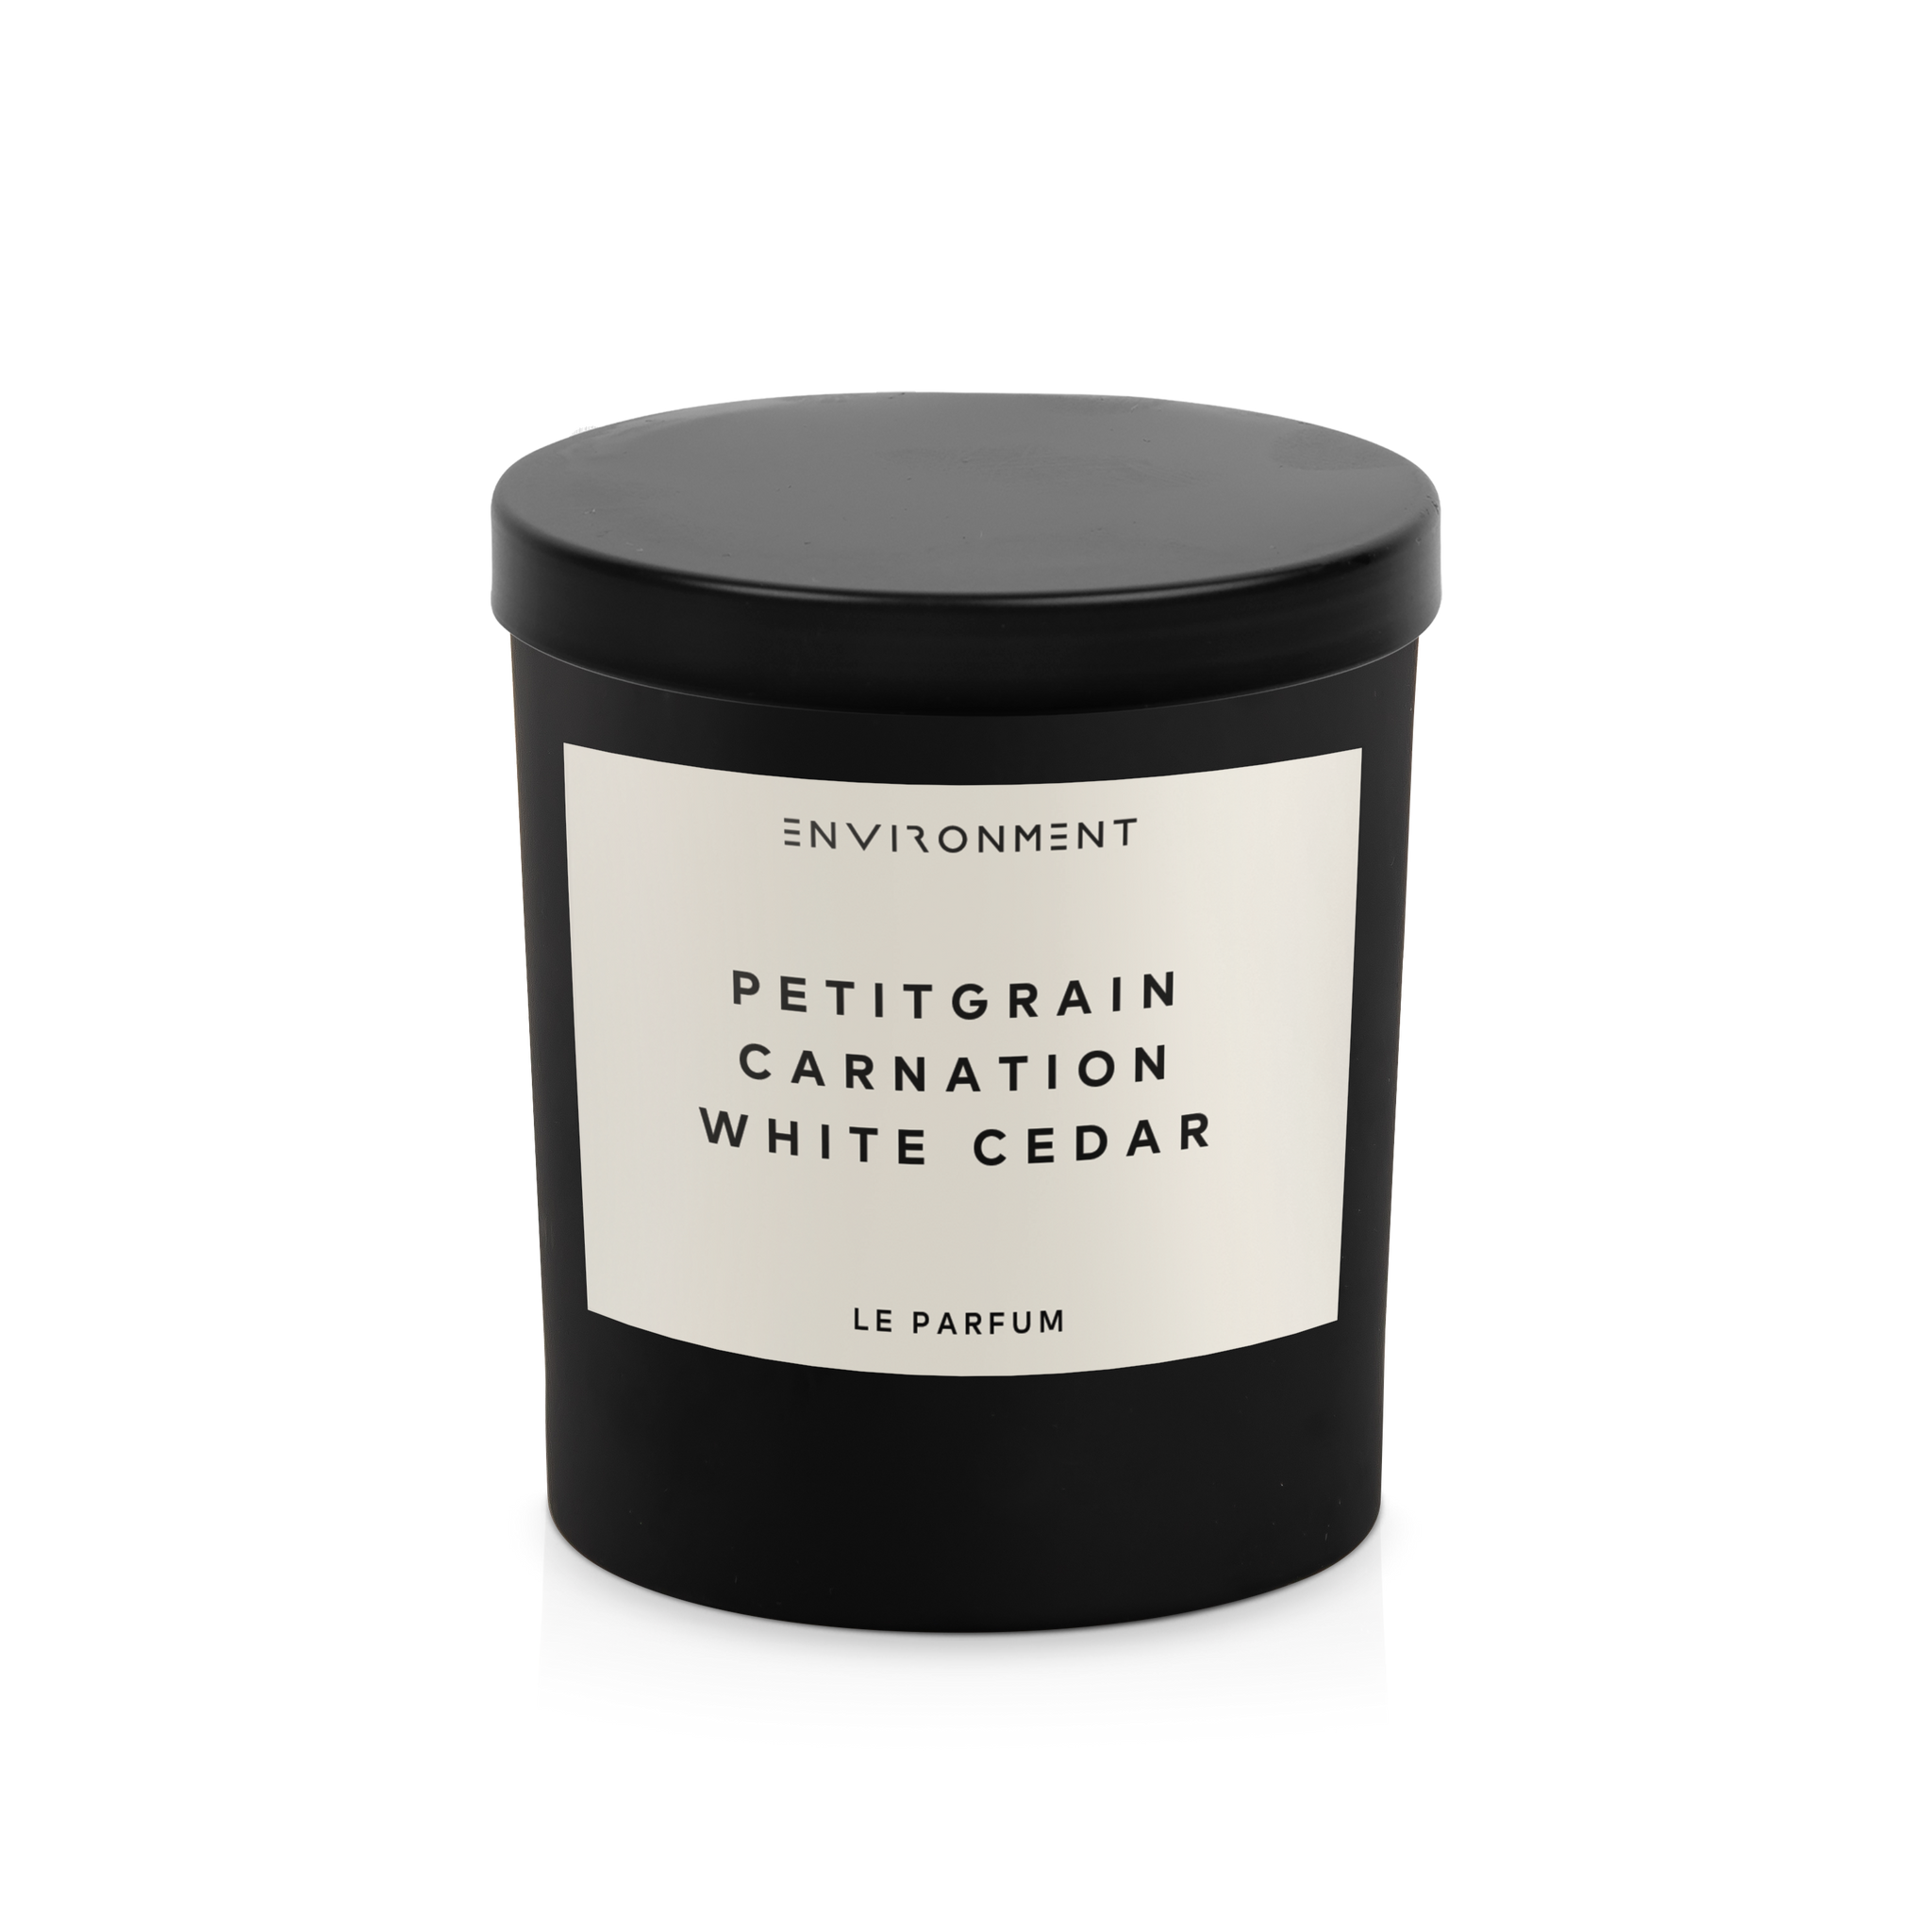 8oz Petitgrain | Carnation | White Cedar Candle (Inspired by YSL L'Homme®)